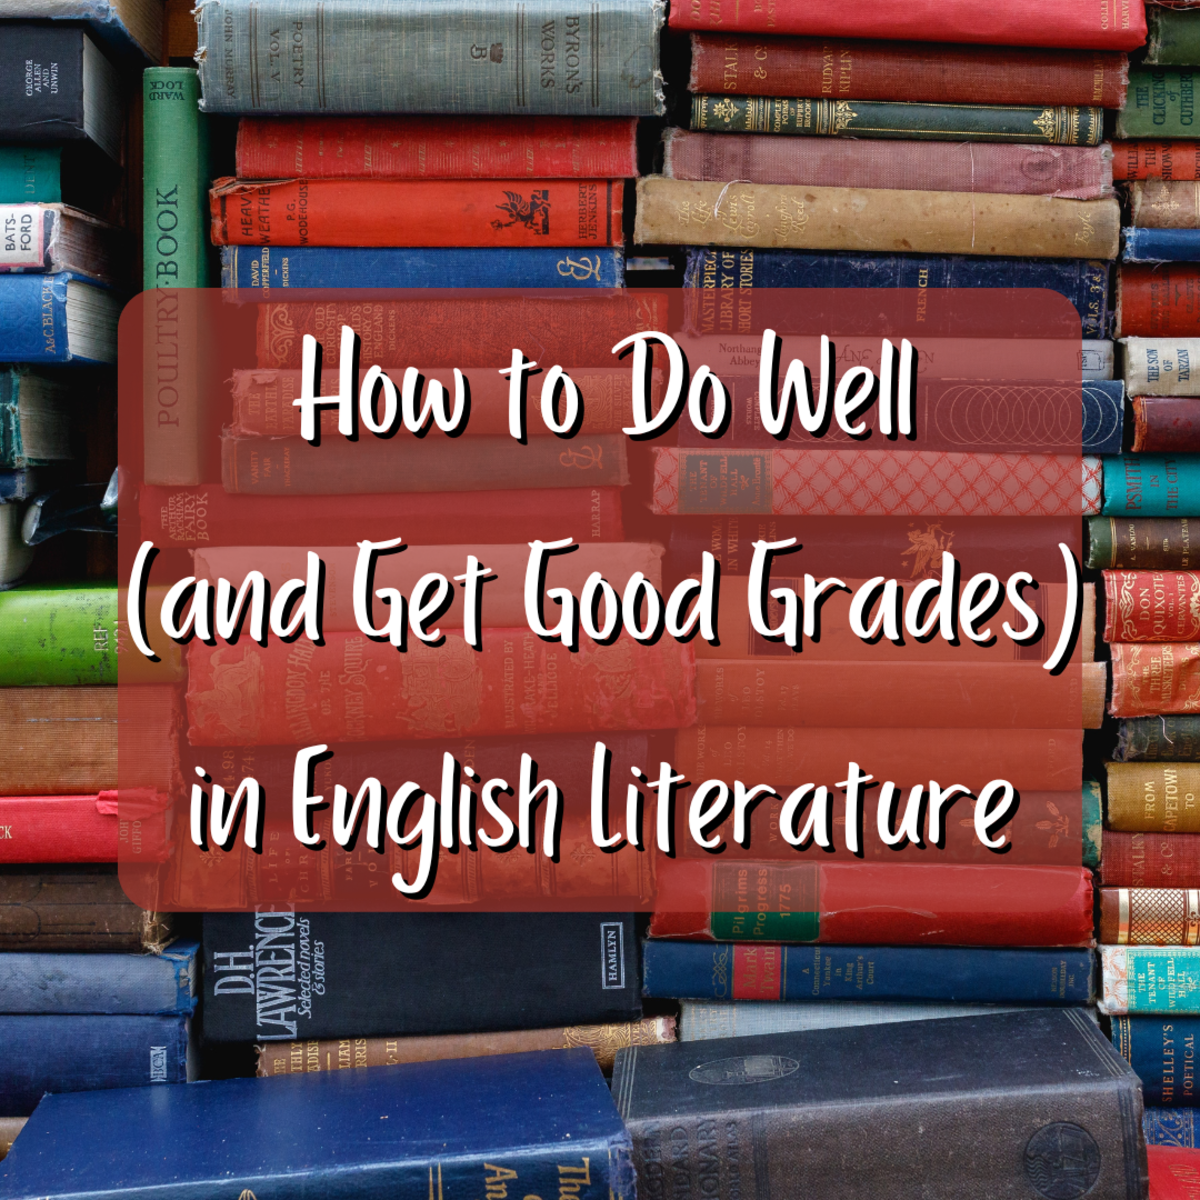 Read on for 11 helpful tips on how to excel in your English Literature courses. Stick around till the end for special help understanding Shakespeare's language.